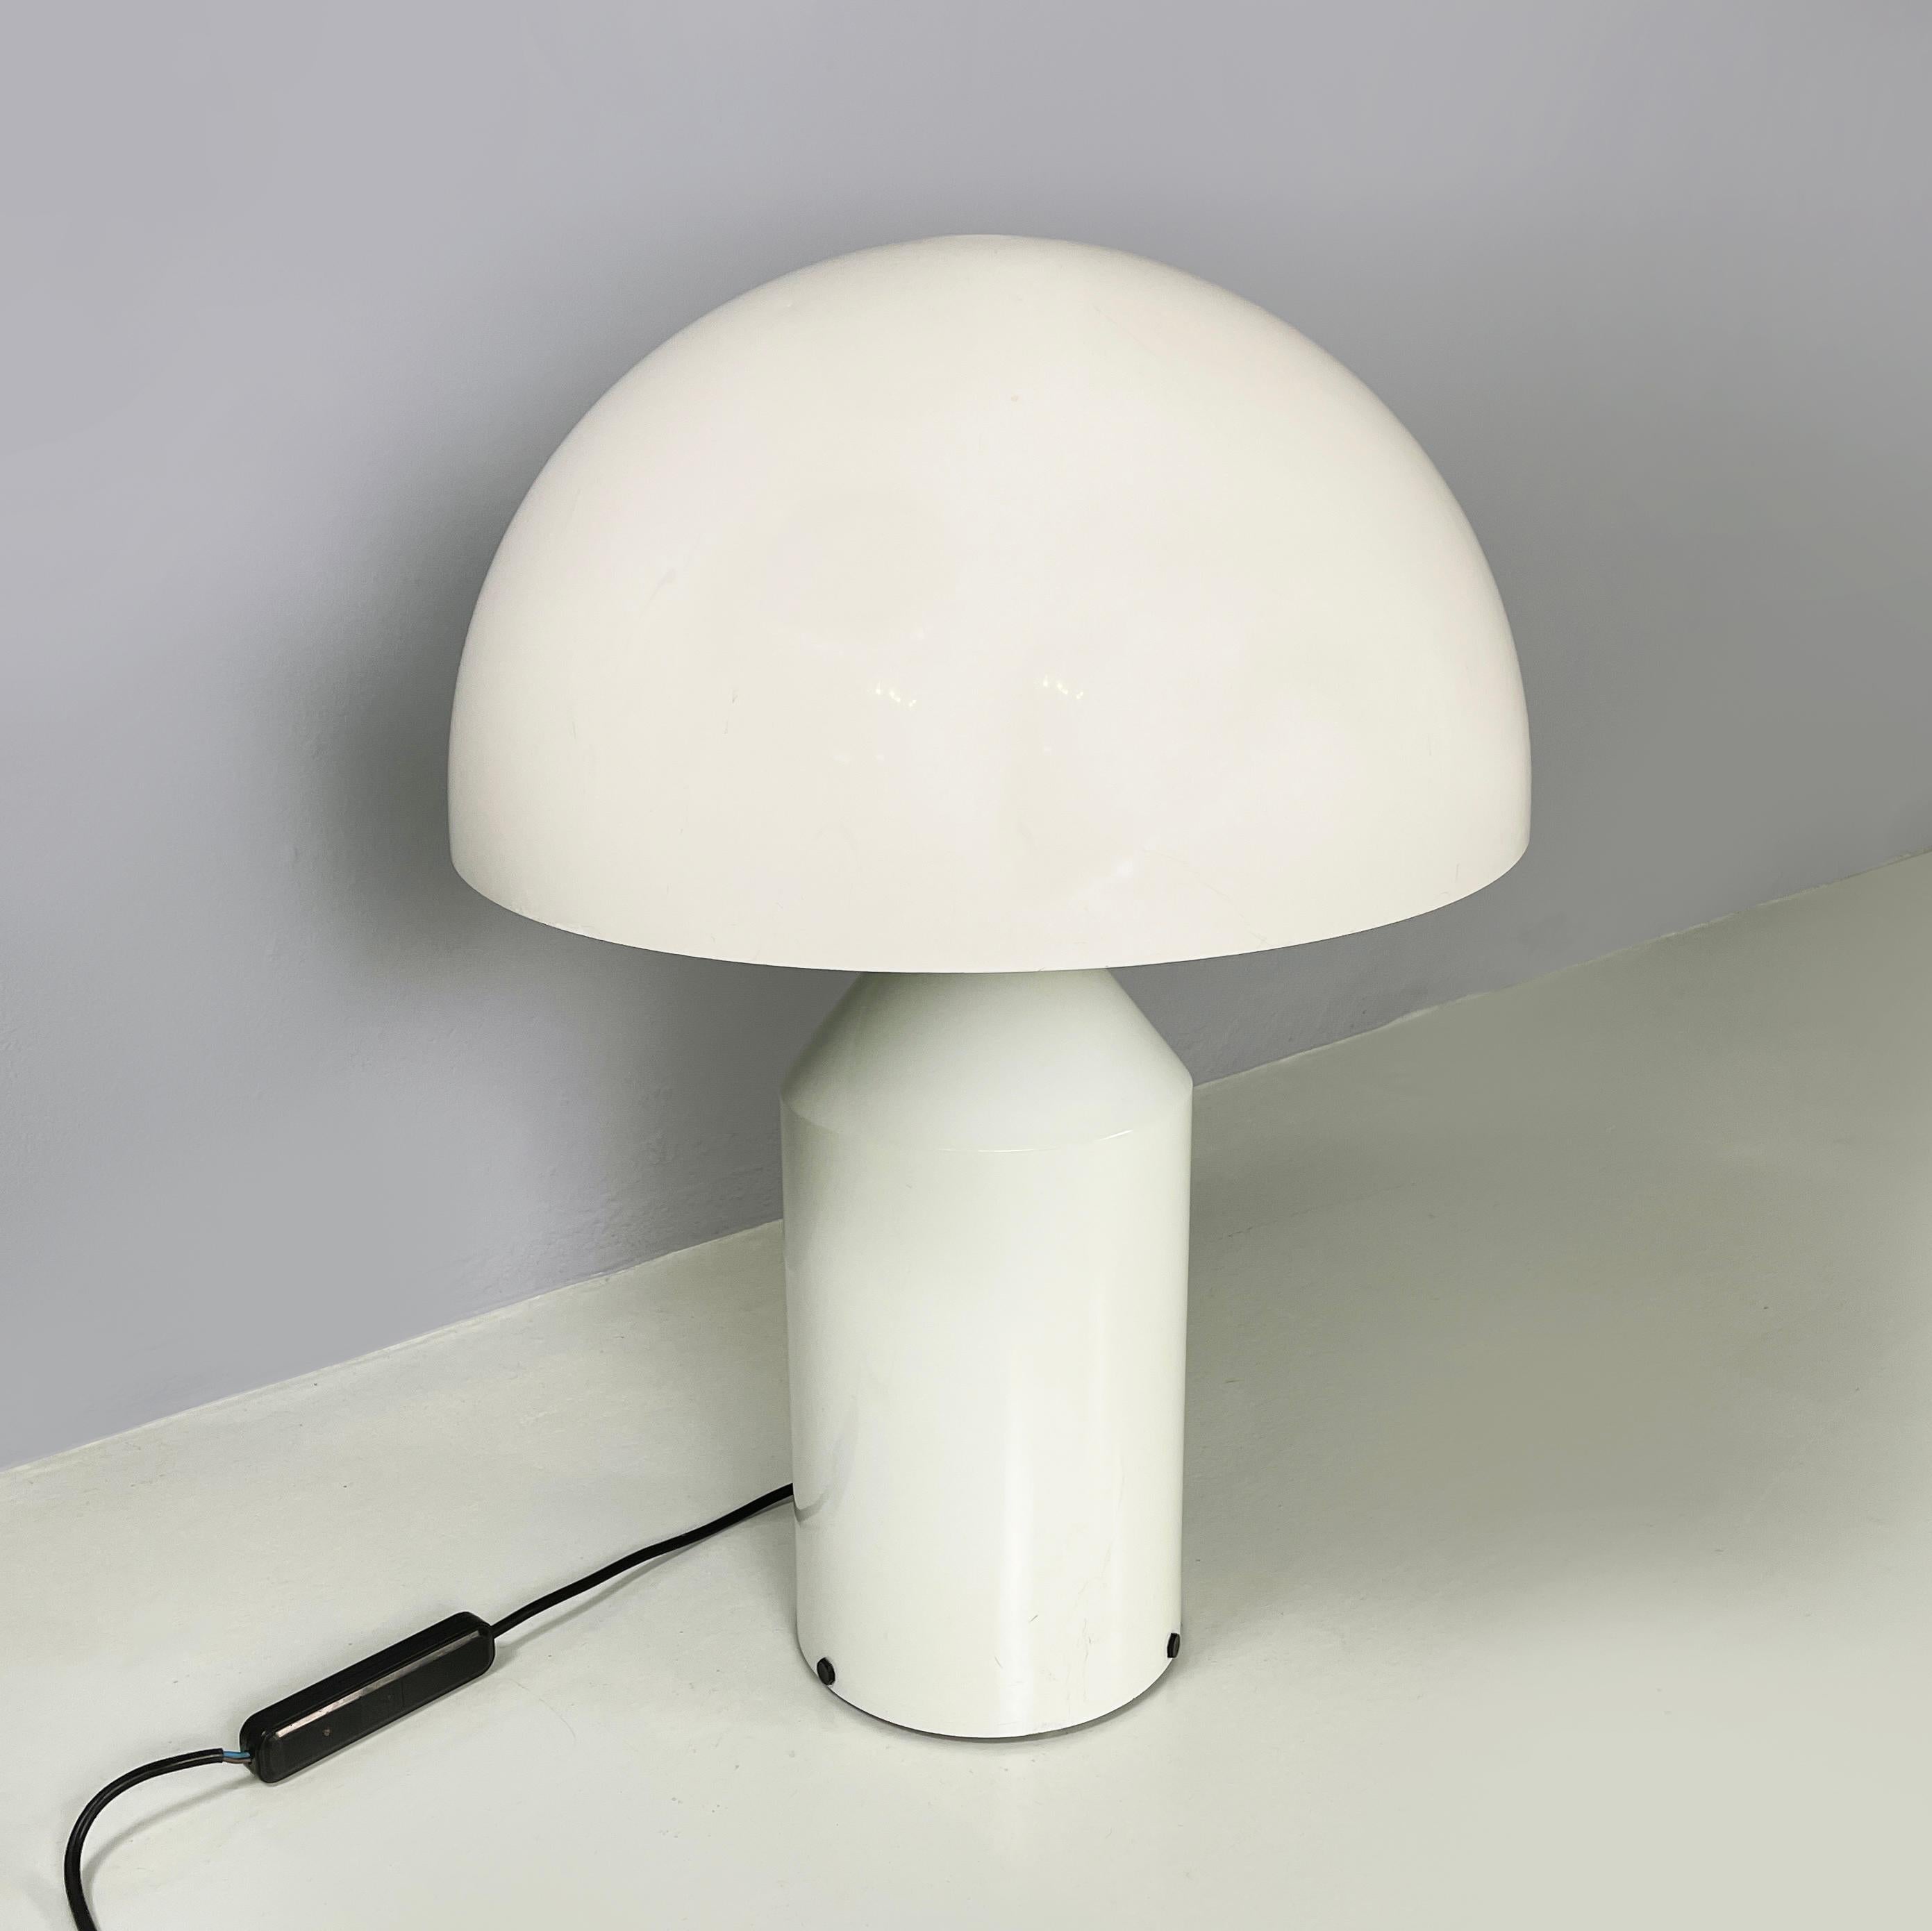 Space Age Italian space age White metal Table lamp Atollo by Magistretti for Oluce, 1970s For Sale